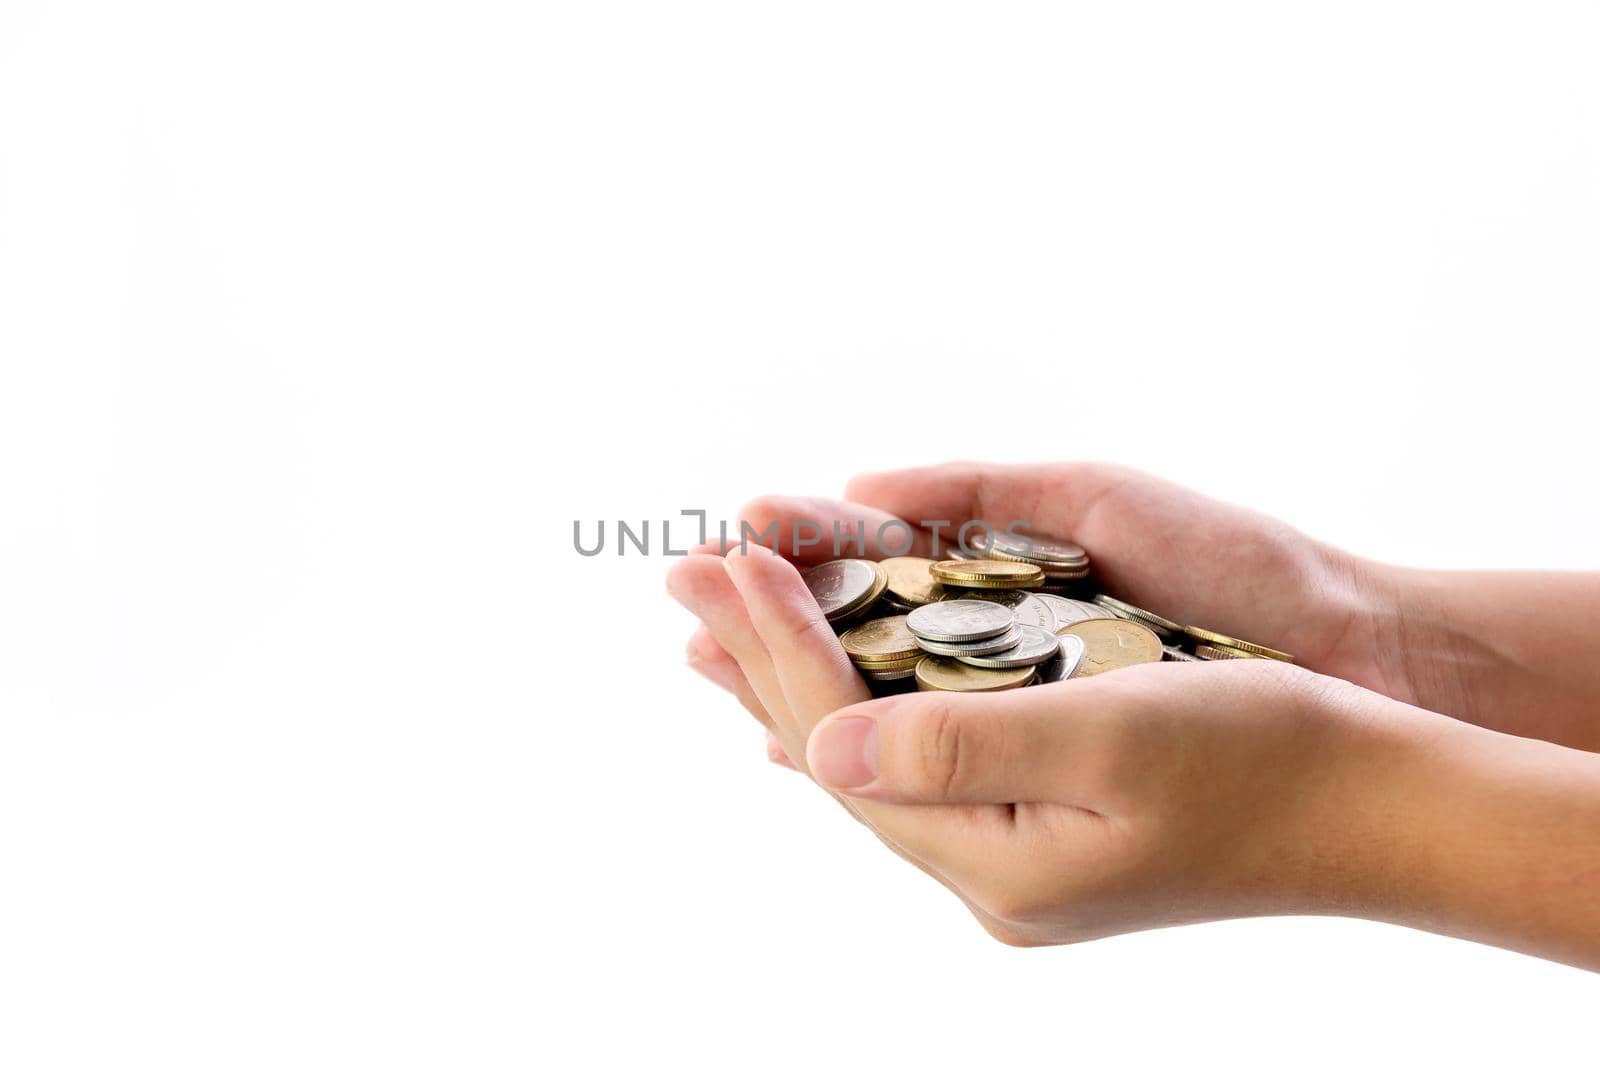 Human hand holding a lot of coins on white background, use for business and finance concepts.